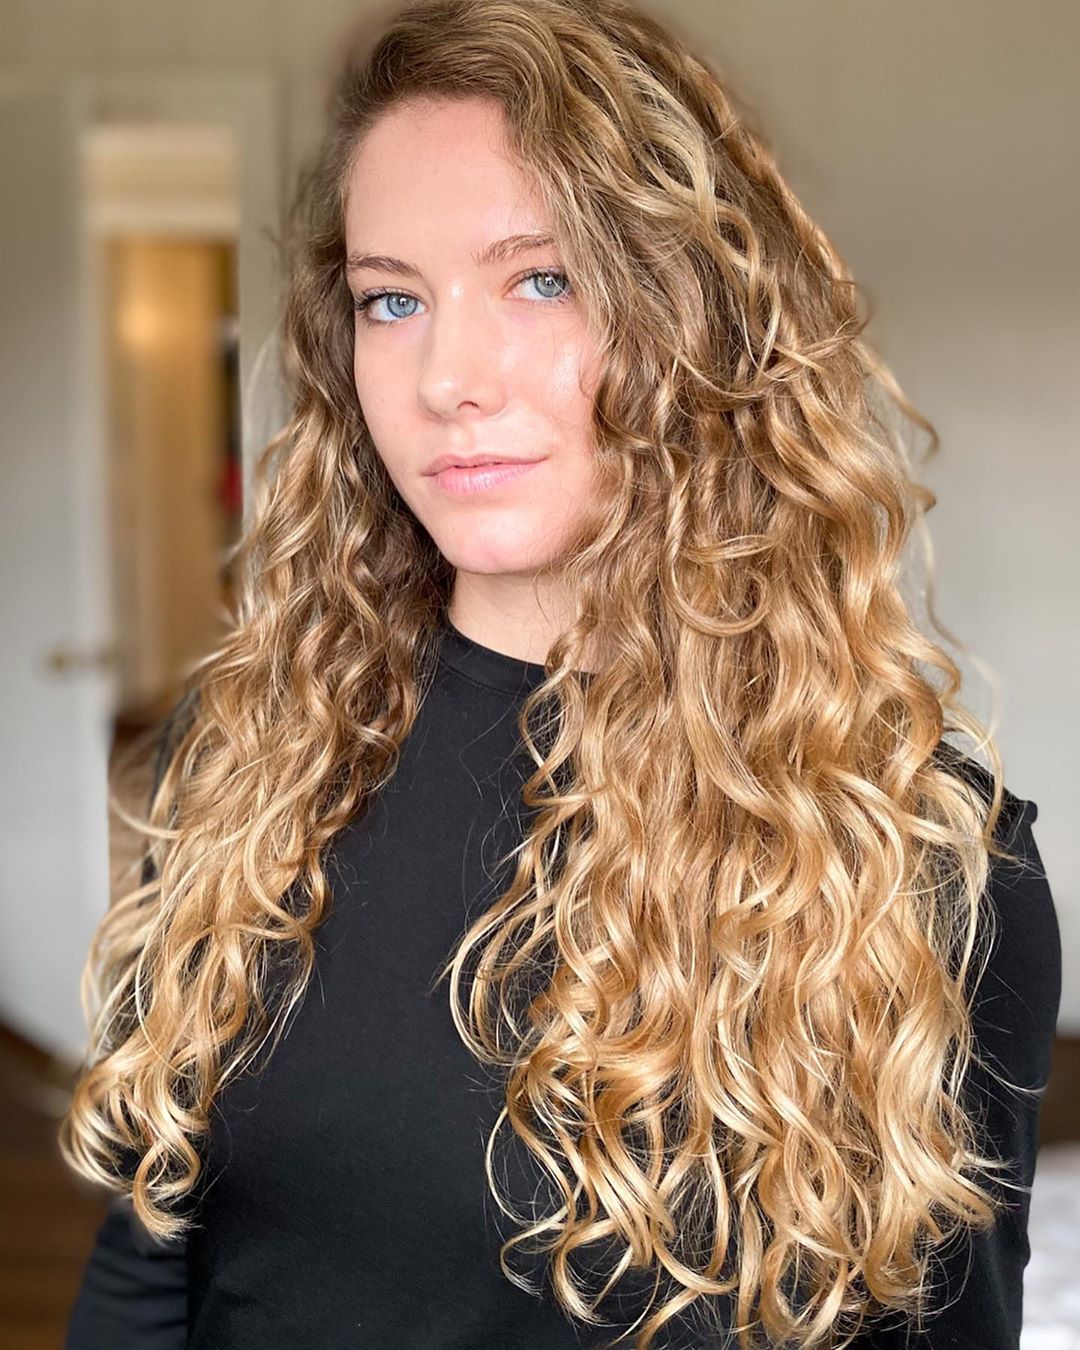 My Modified Curly Girl Method for Wavy Hair in 12 Simple Steps